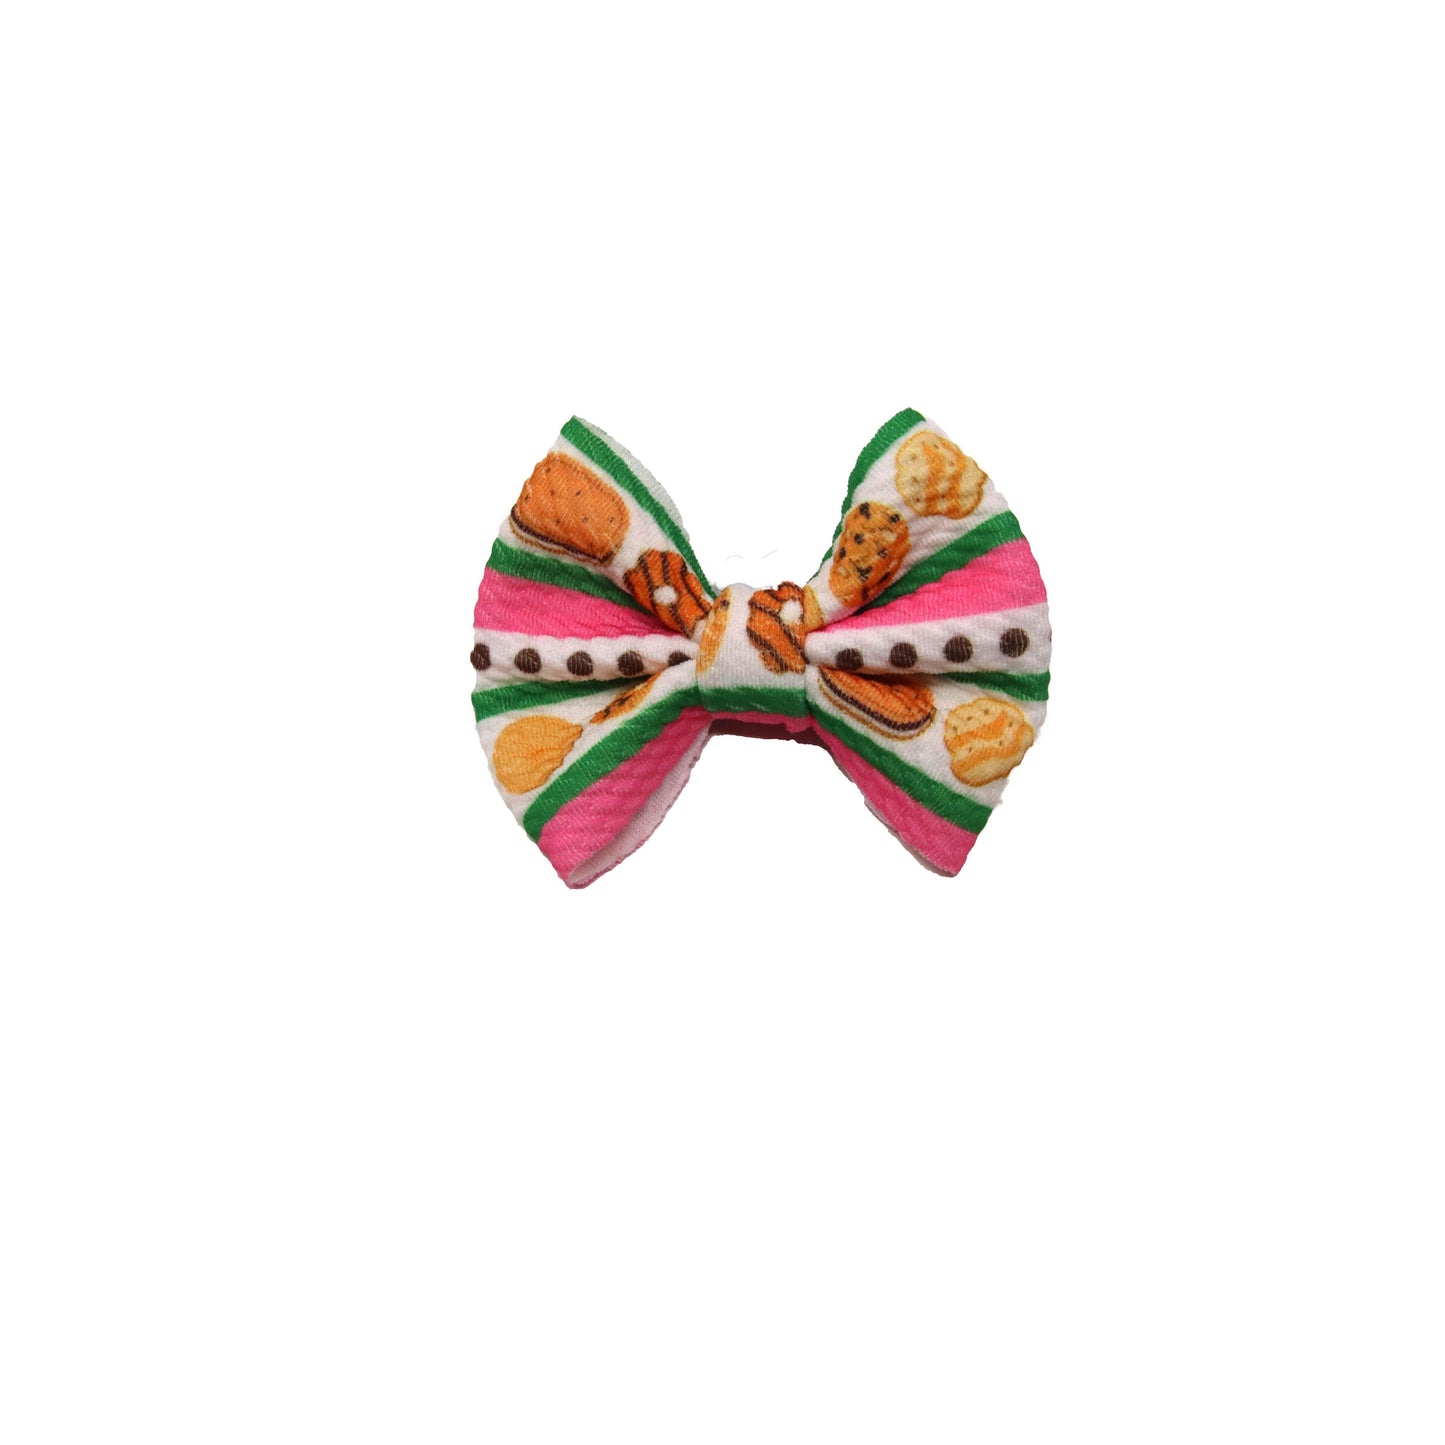 Cookie Stripe Fabric Bow 3"